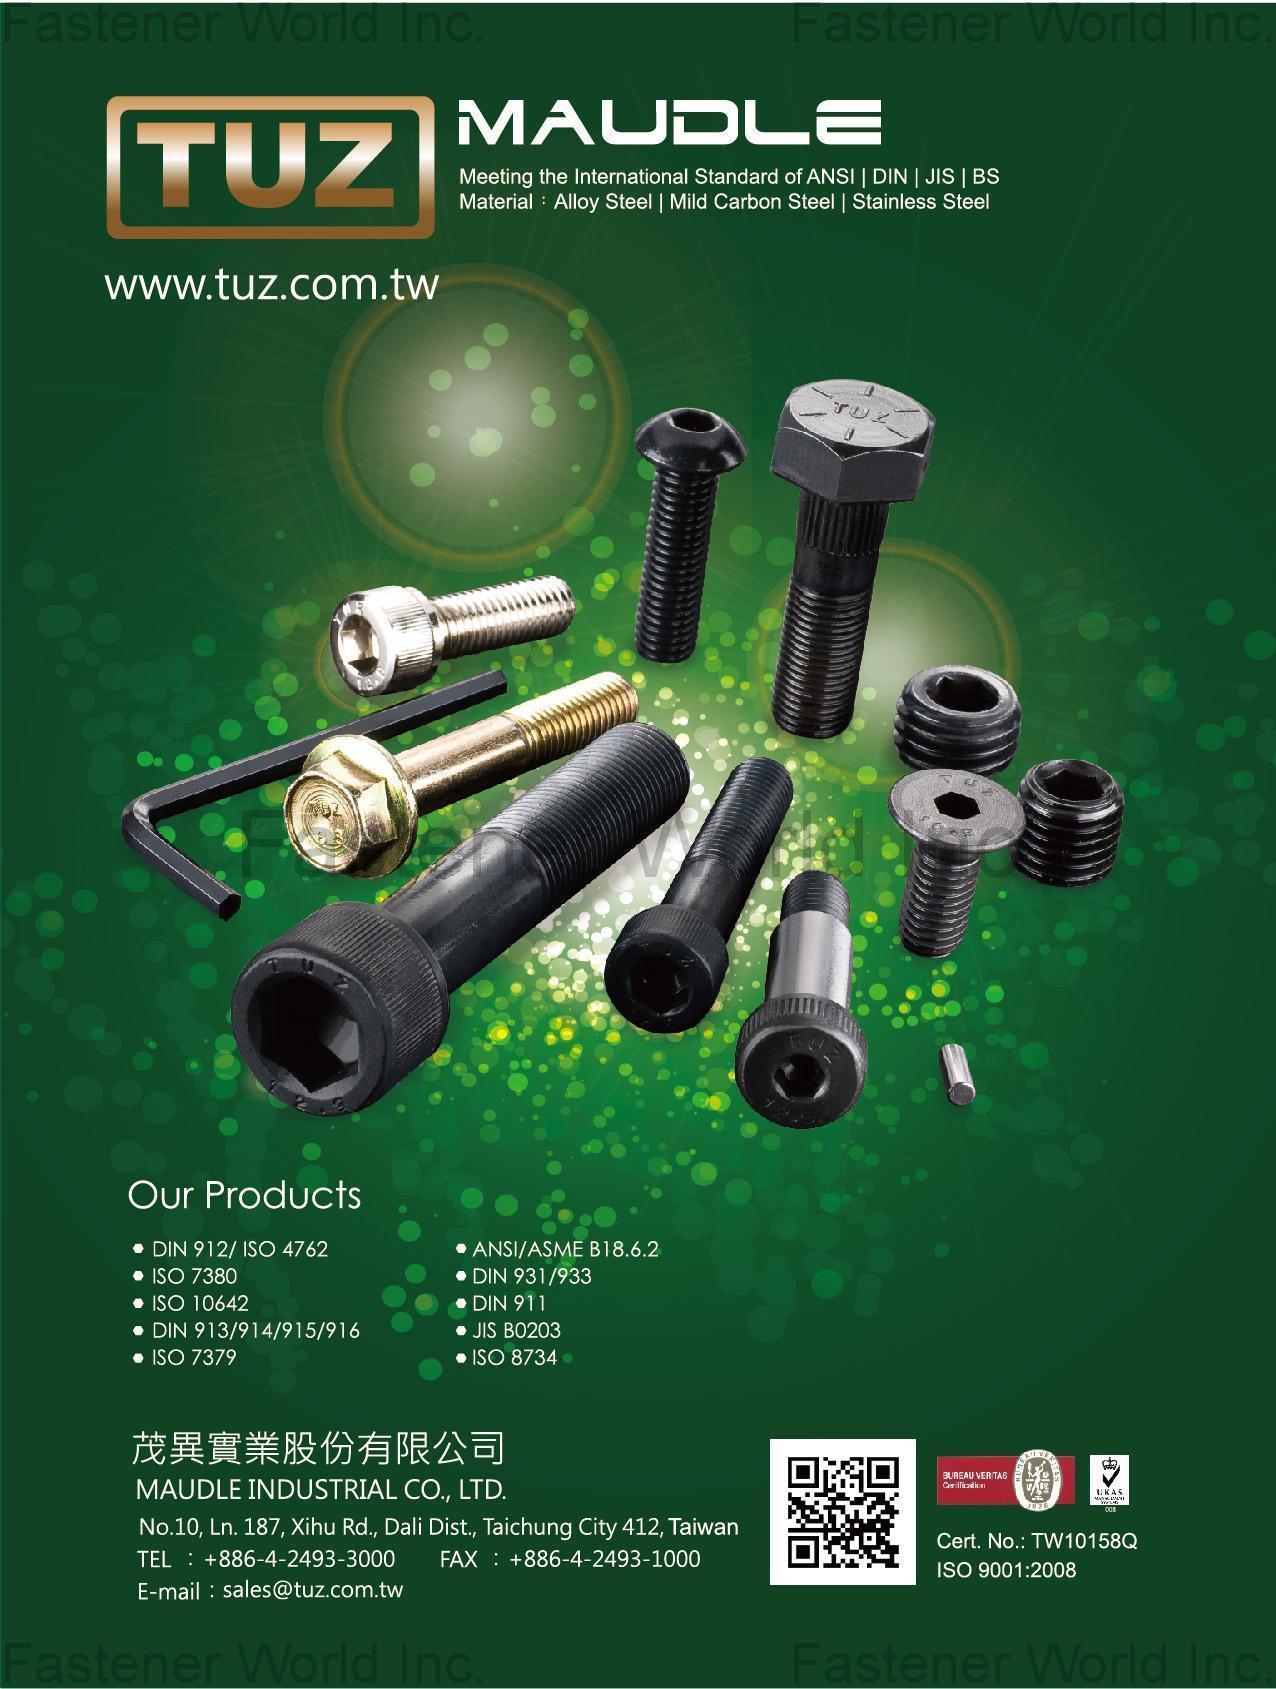 MAUDLE INDUSTRIAL CO., LTD.  , All Kinds of High Tensile Screws / Fasteners , All Kinds of Screws